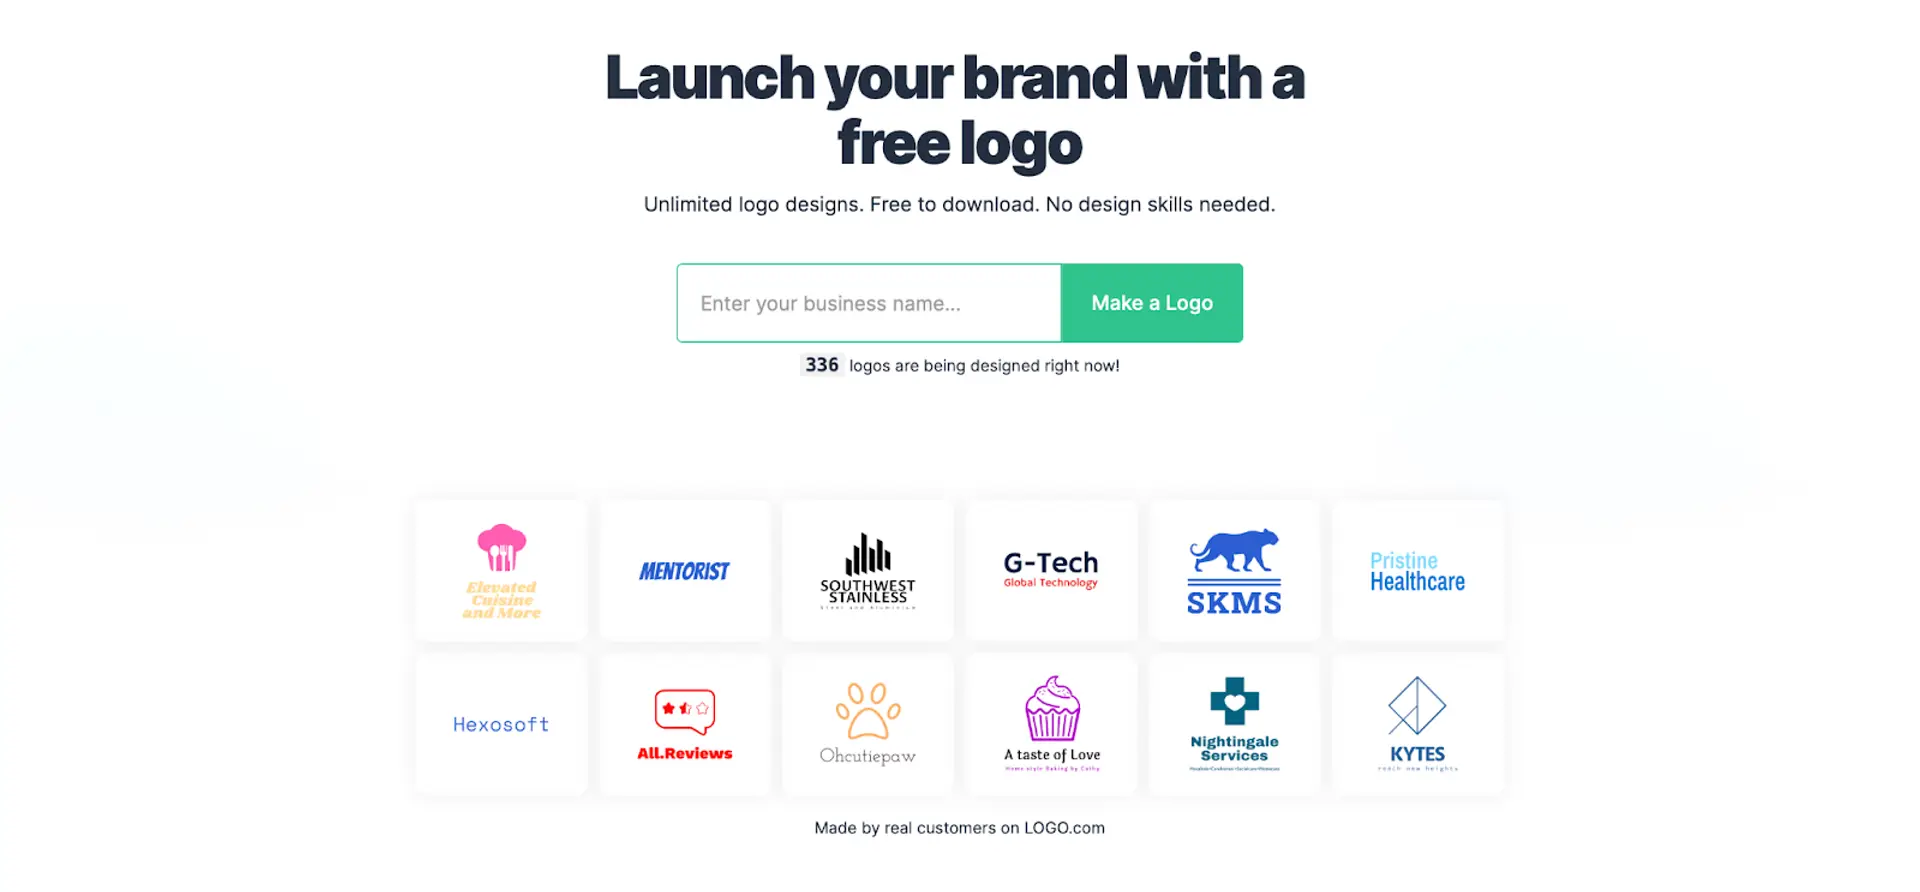 Create a gorgeous, free logo in minutes!